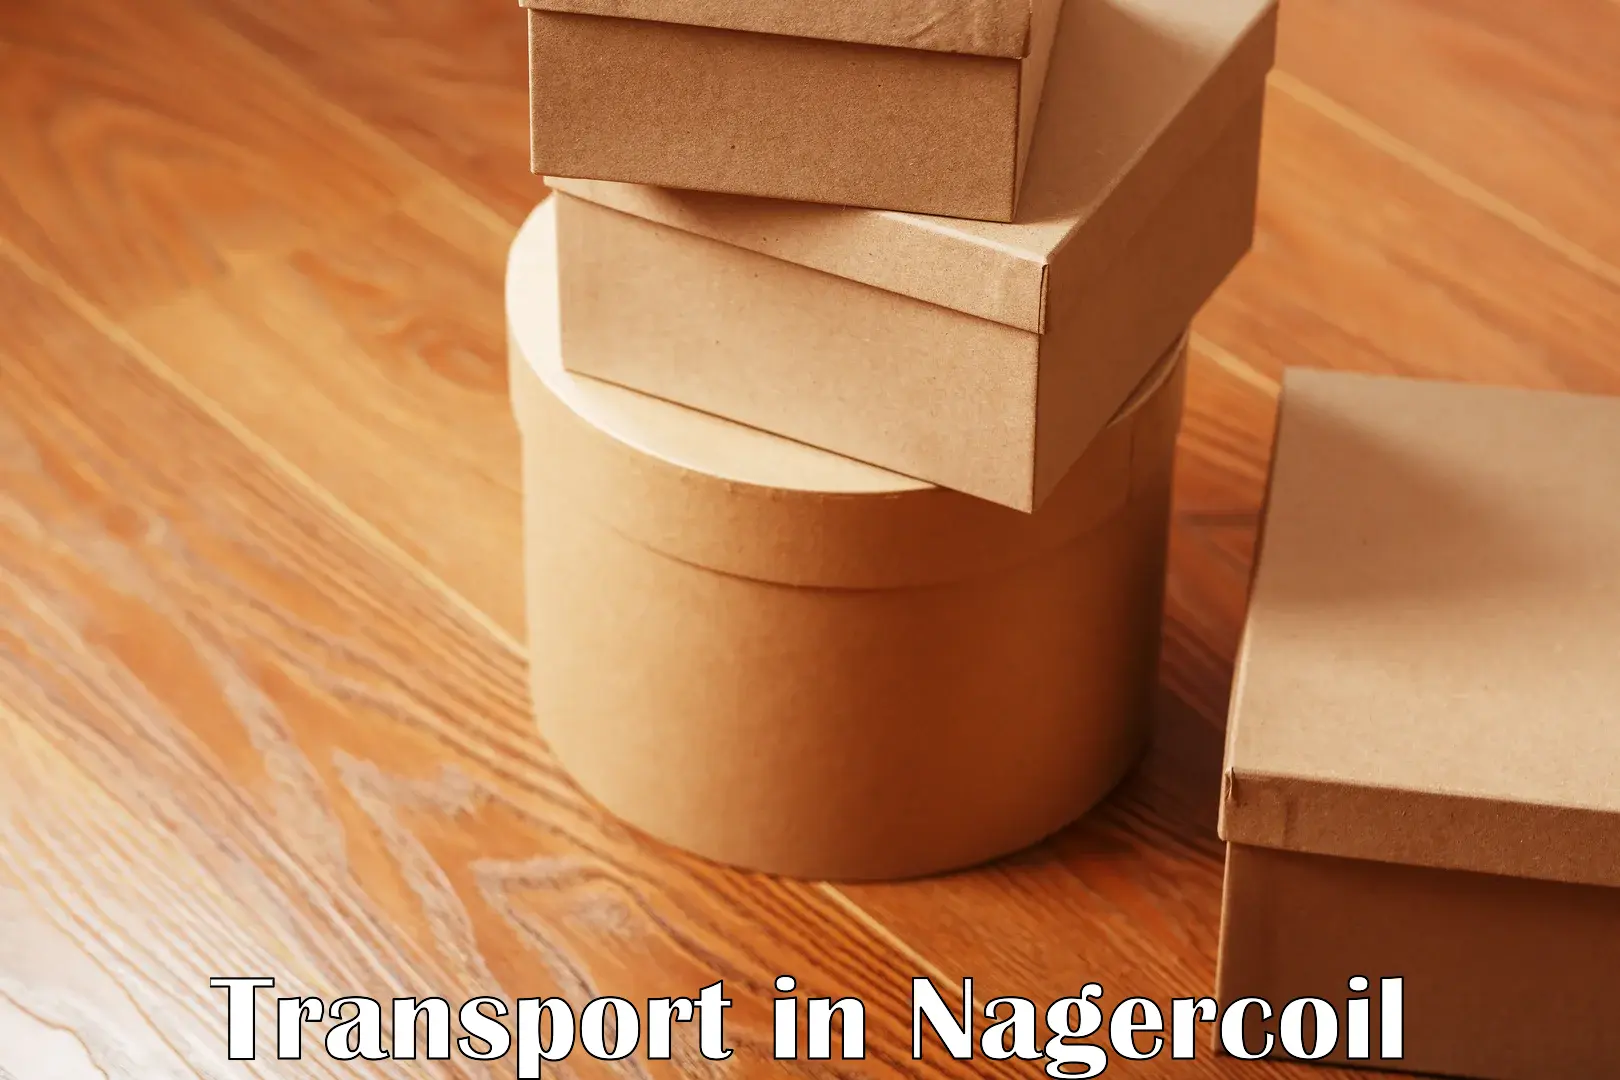 Land transport services in Nagercoil